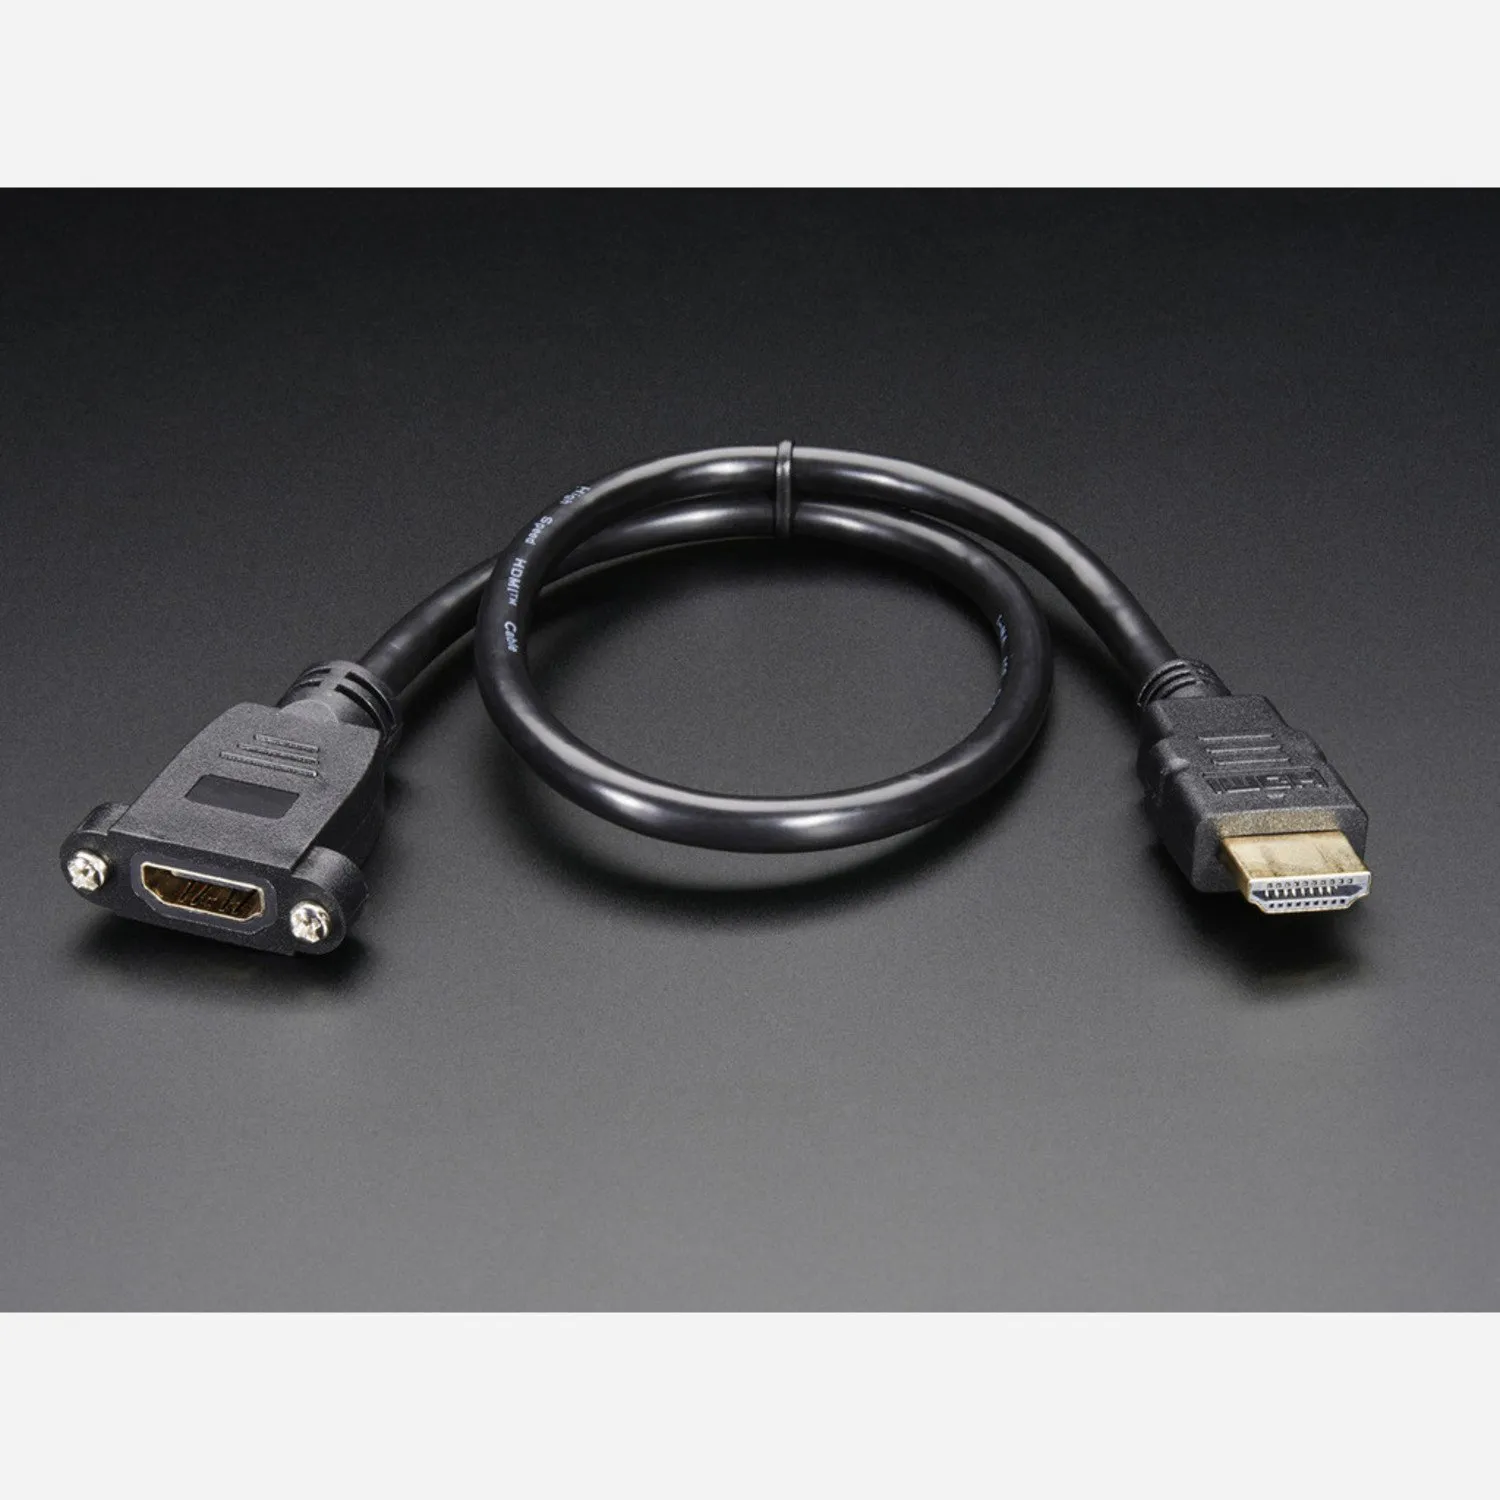 Photo of Panel mount HDMI Cable - 40 cm